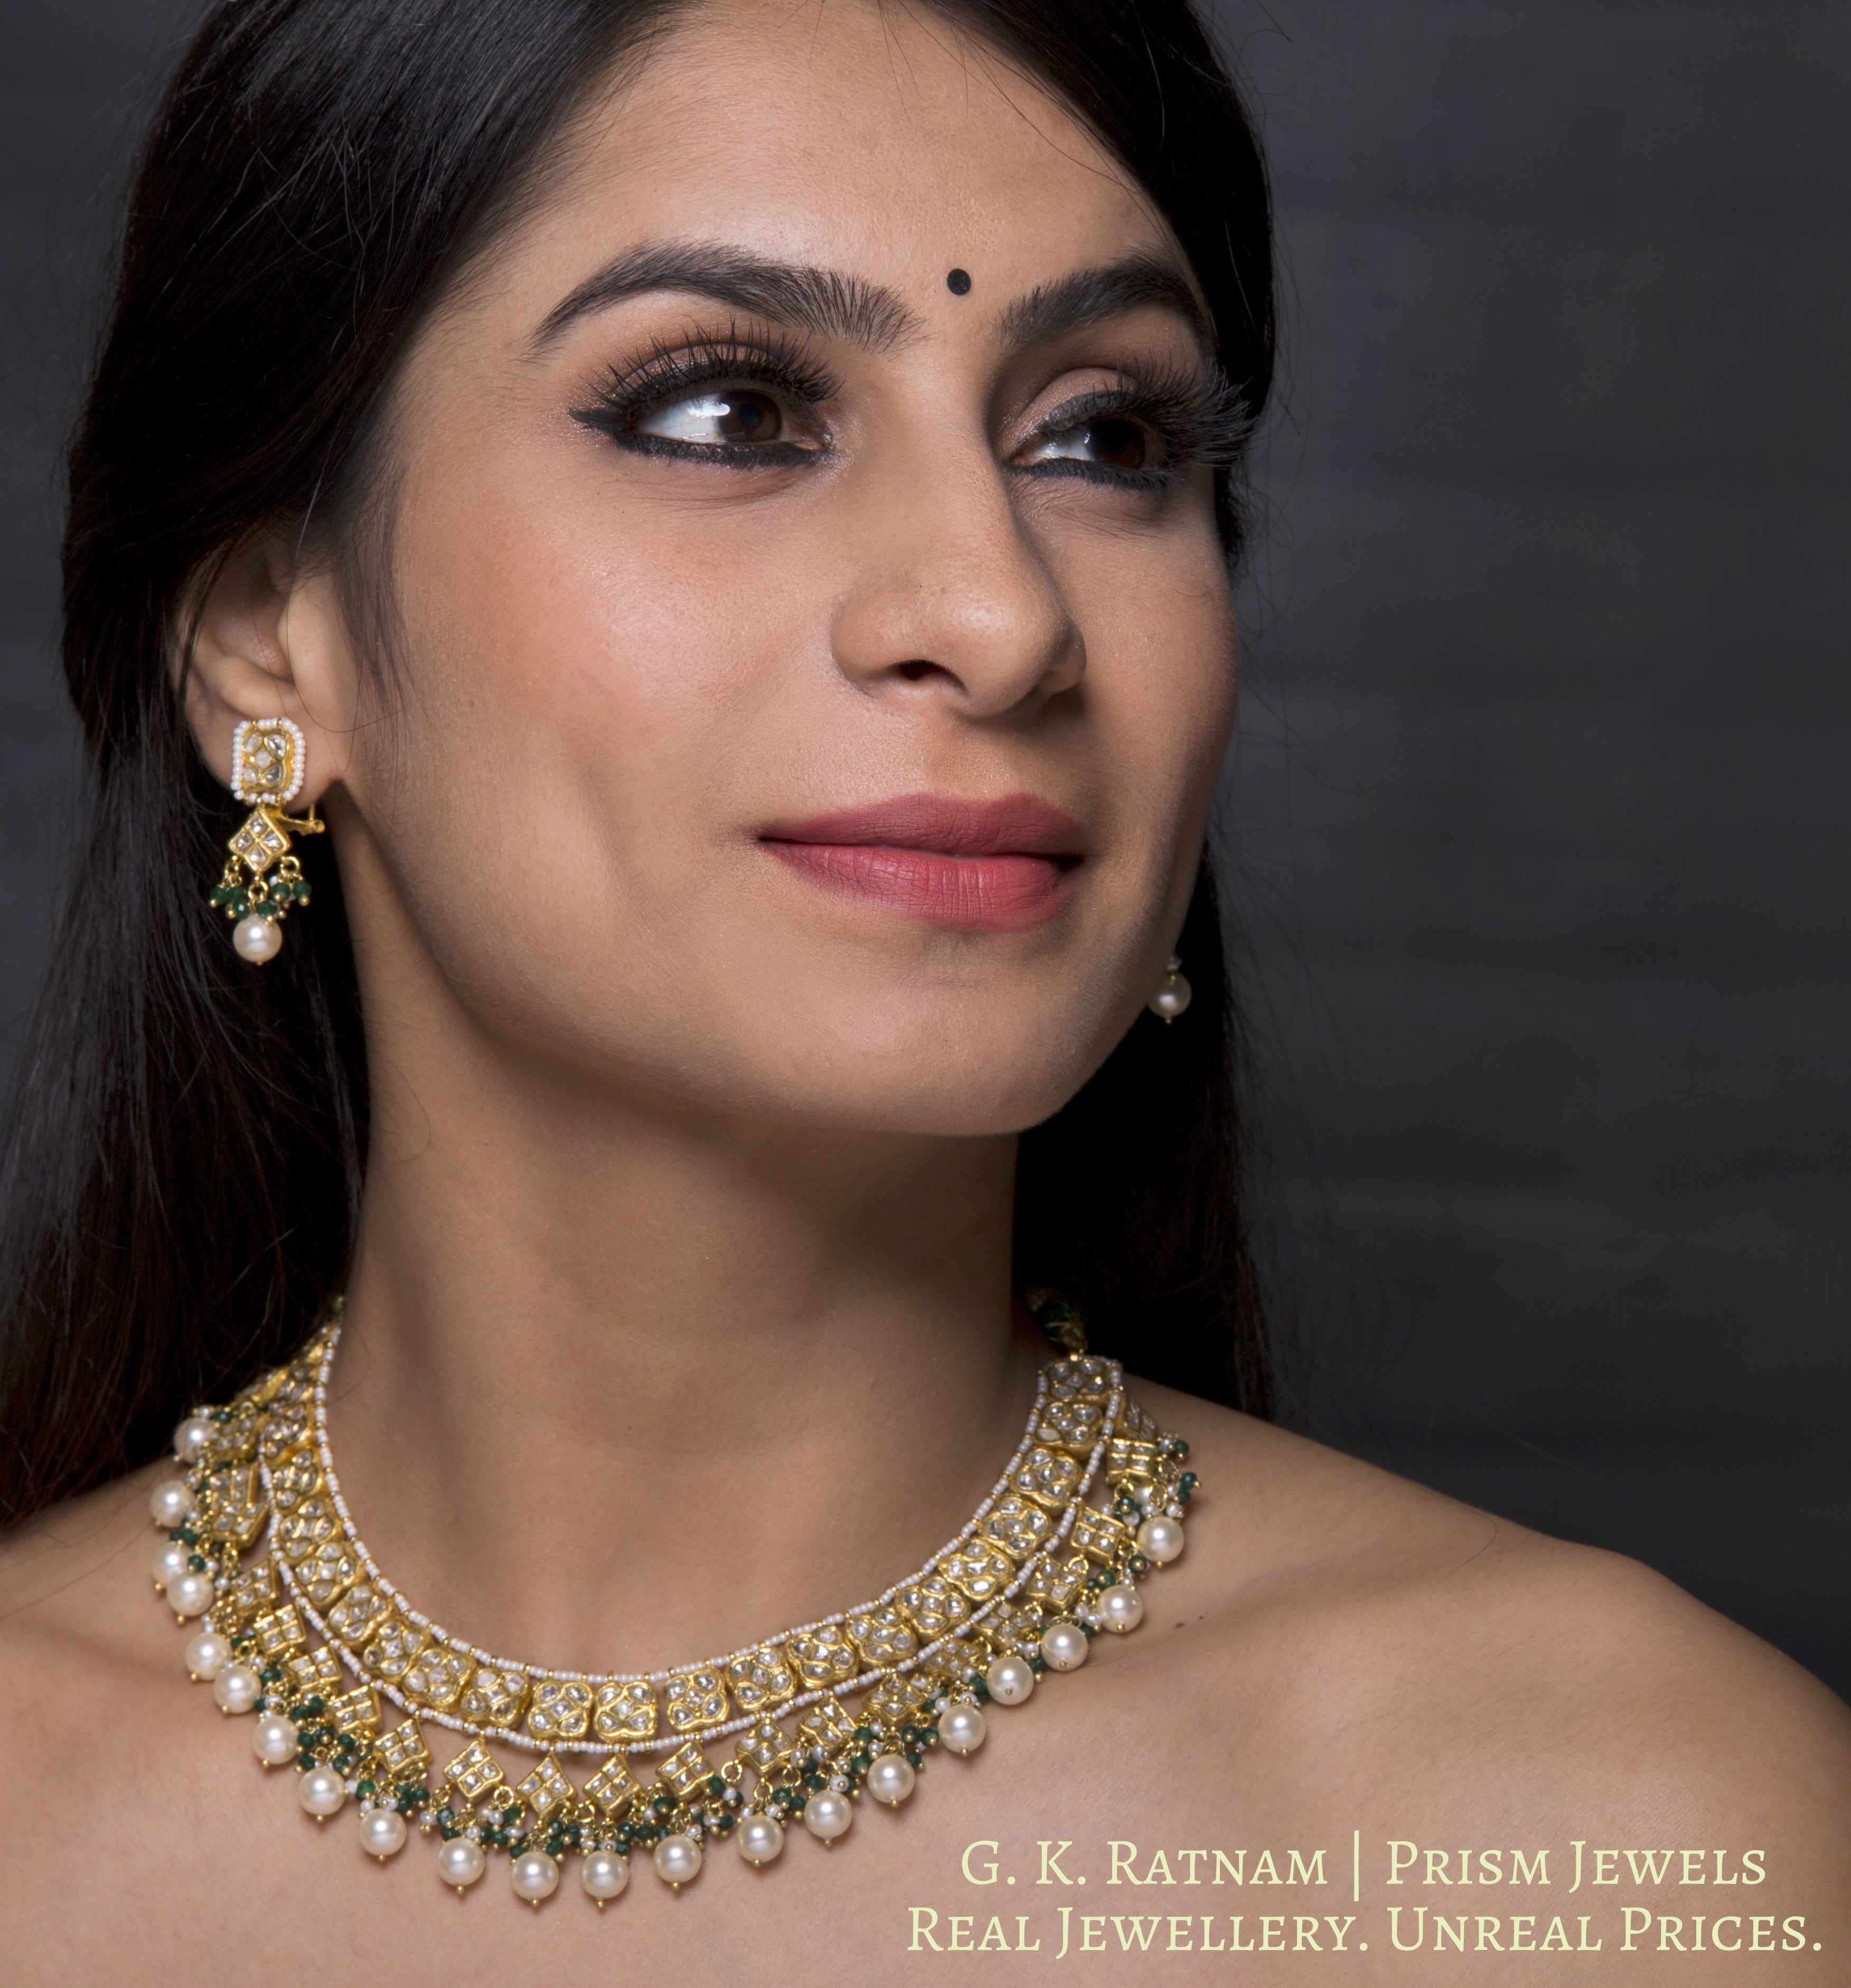 23k Gold and Diamond Polki Necklace Set with Natural freshwater pearls ...